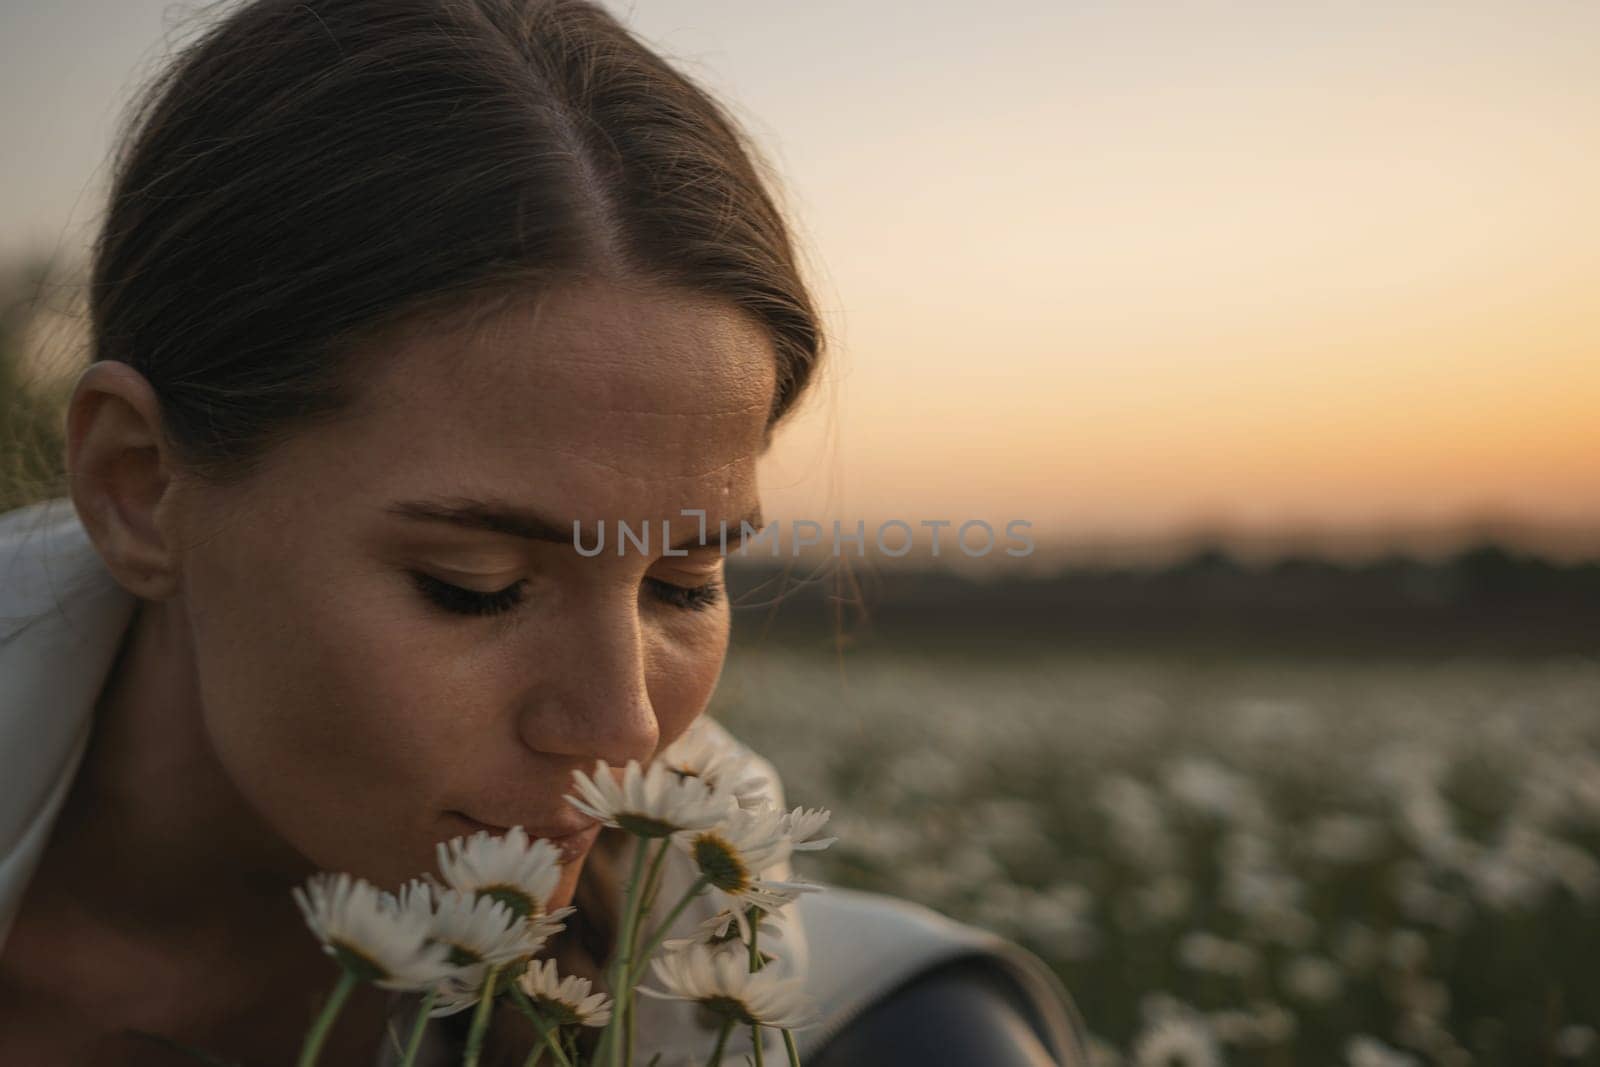 A woman is smelling flowers in a field. The flowers are white and the sky is orange. The woman is looking at the camera